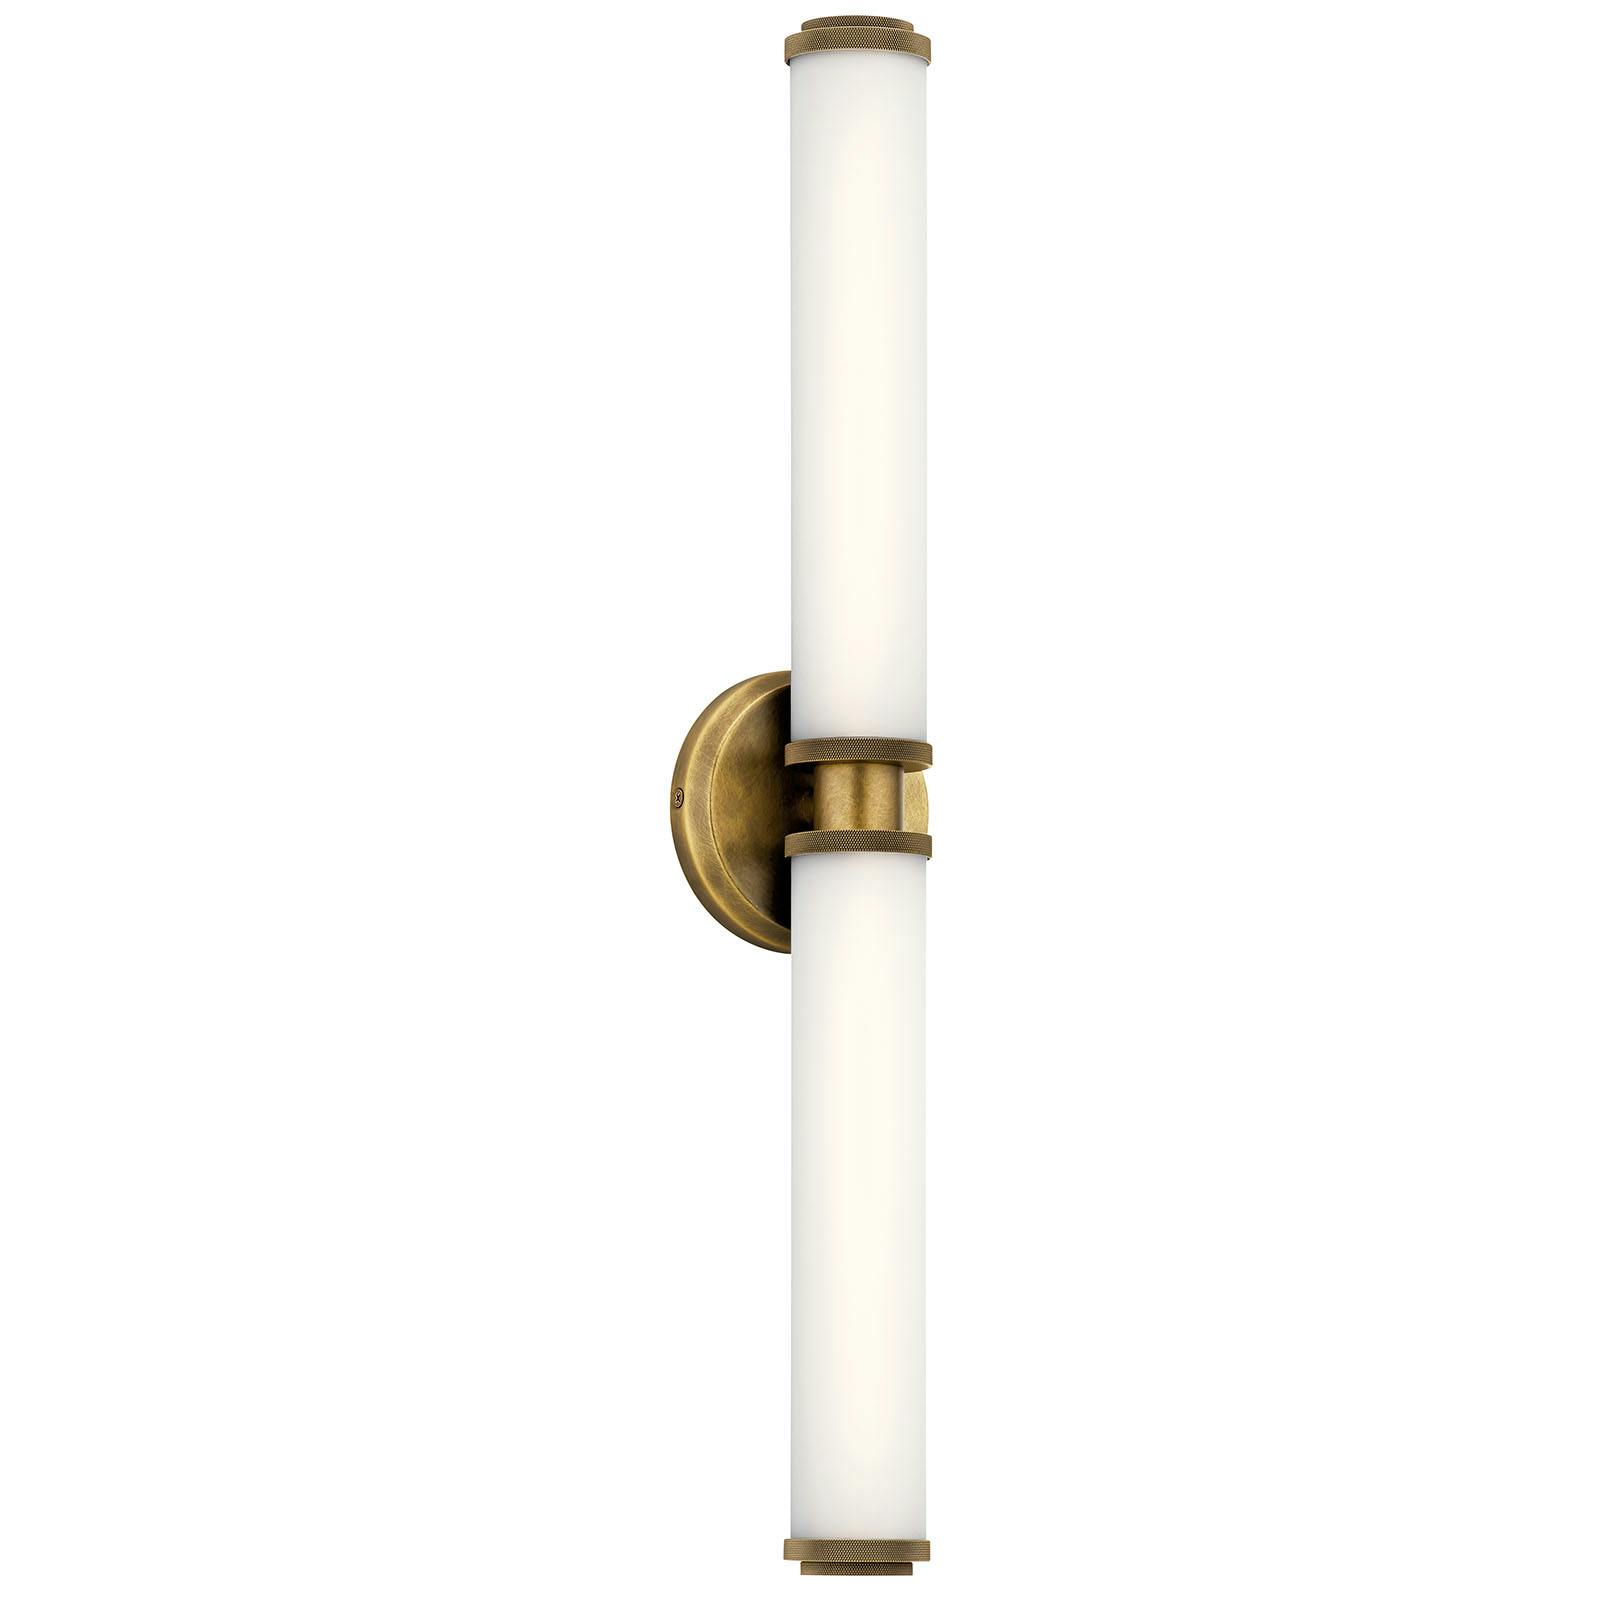 Indeco 27" LED Linear Vanity Light Brass hung vertically on a white background